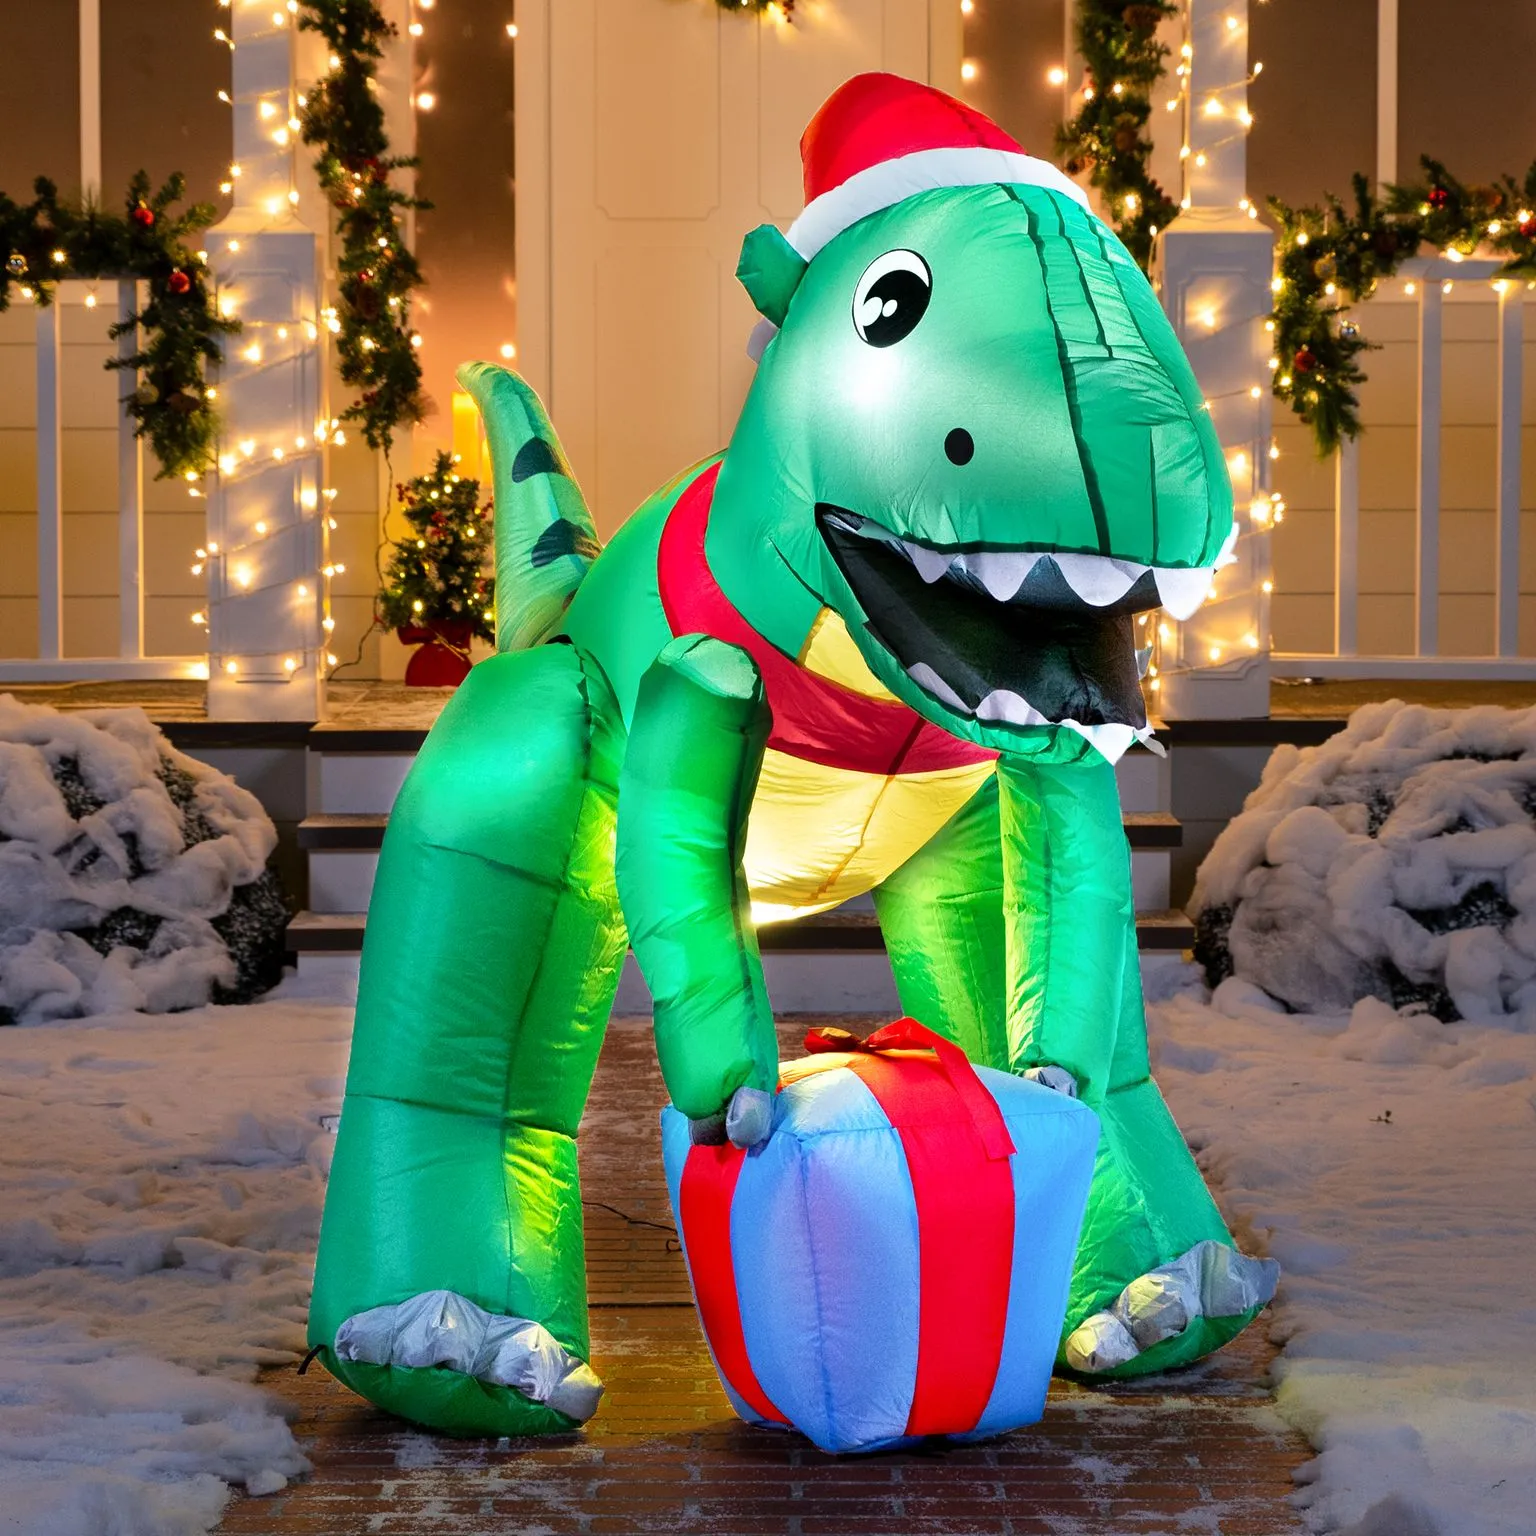 What Makes a Good Christmas Inflatable: Choosing the Perfect Decoration